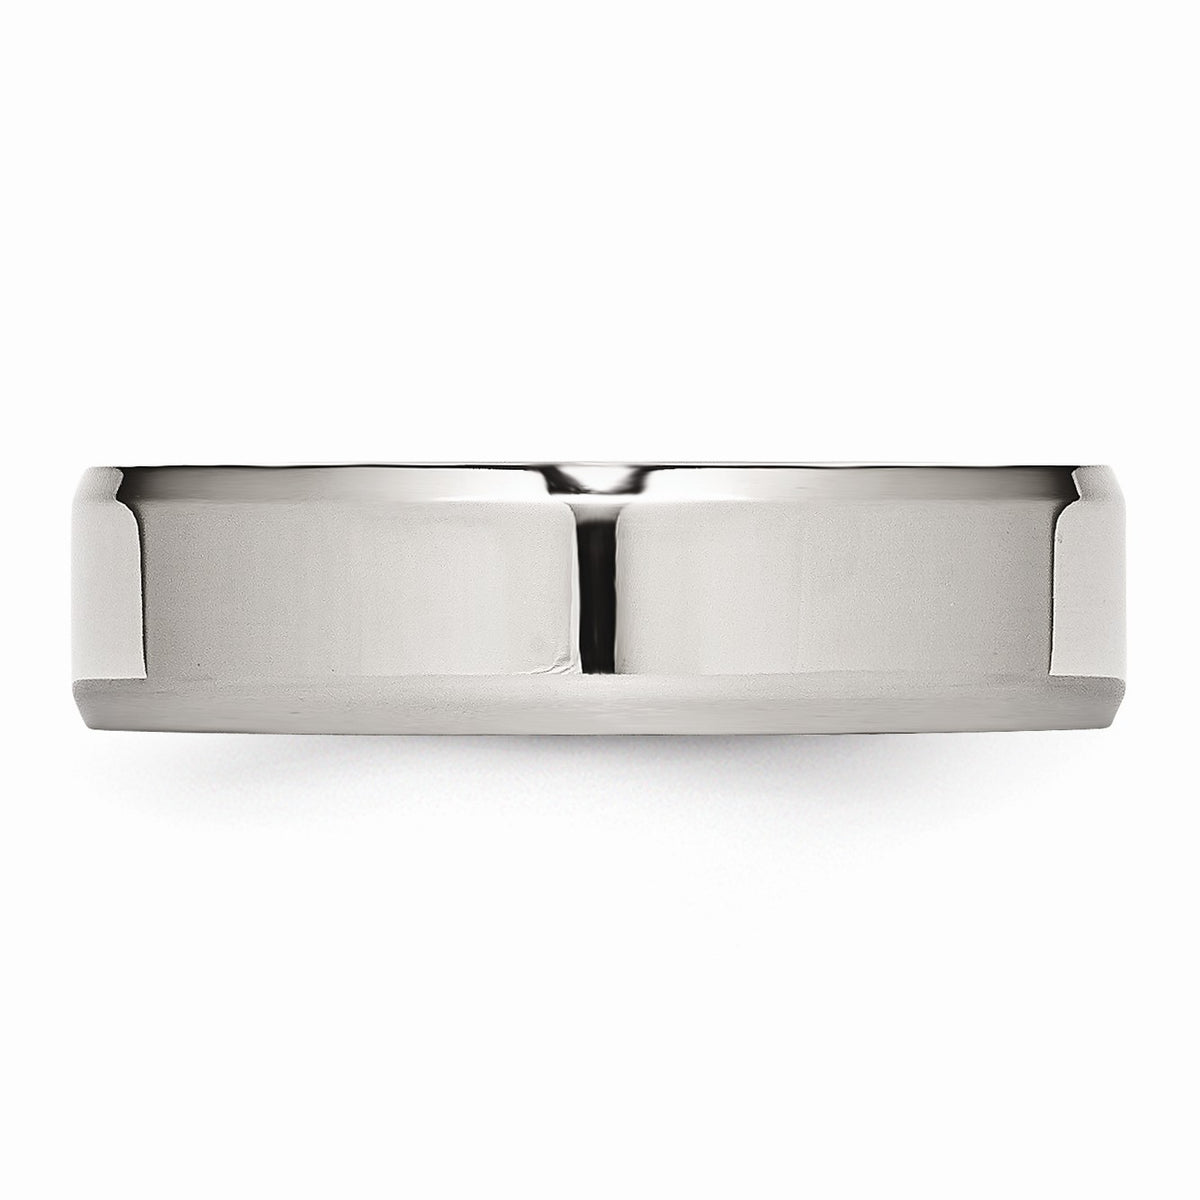 Alternate view of the 6mm Polished Beveled Edge Comfort Fit Stainless Steel Band by The Black Bow Jewelry Co.